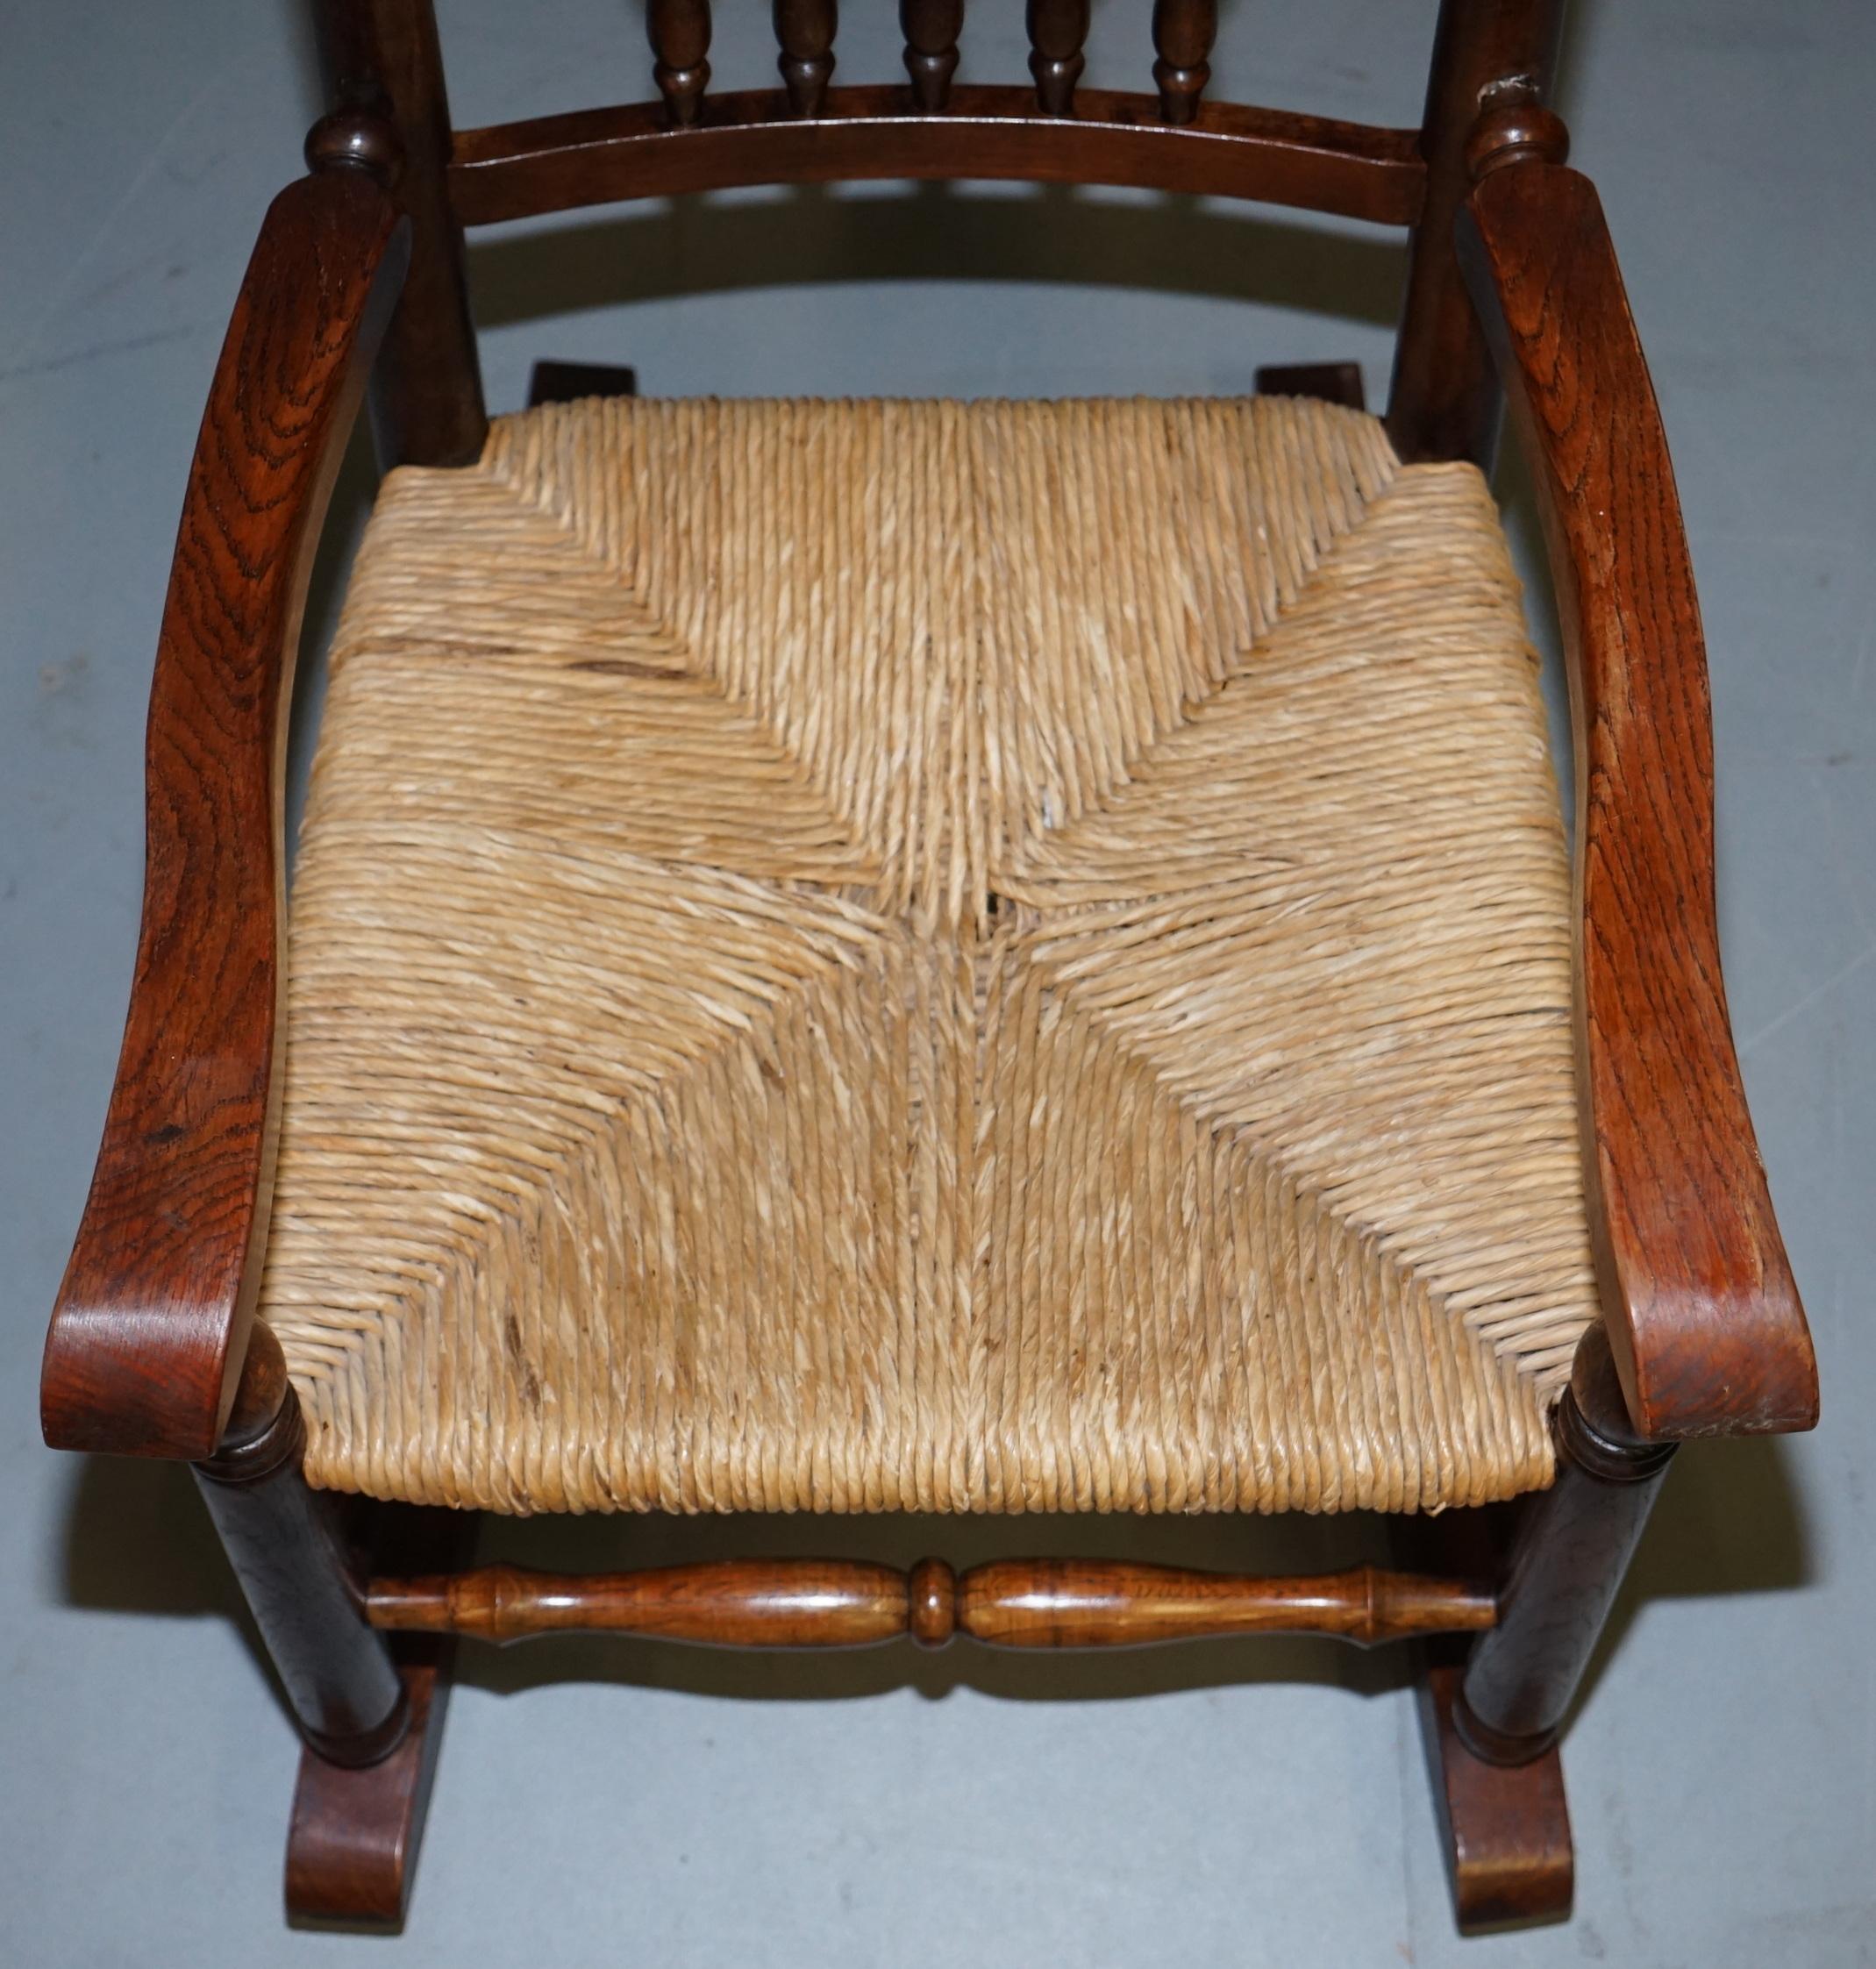 English Lovely Antique Elm Victorian William Morris Sussex Chair Style Rocking Armchair